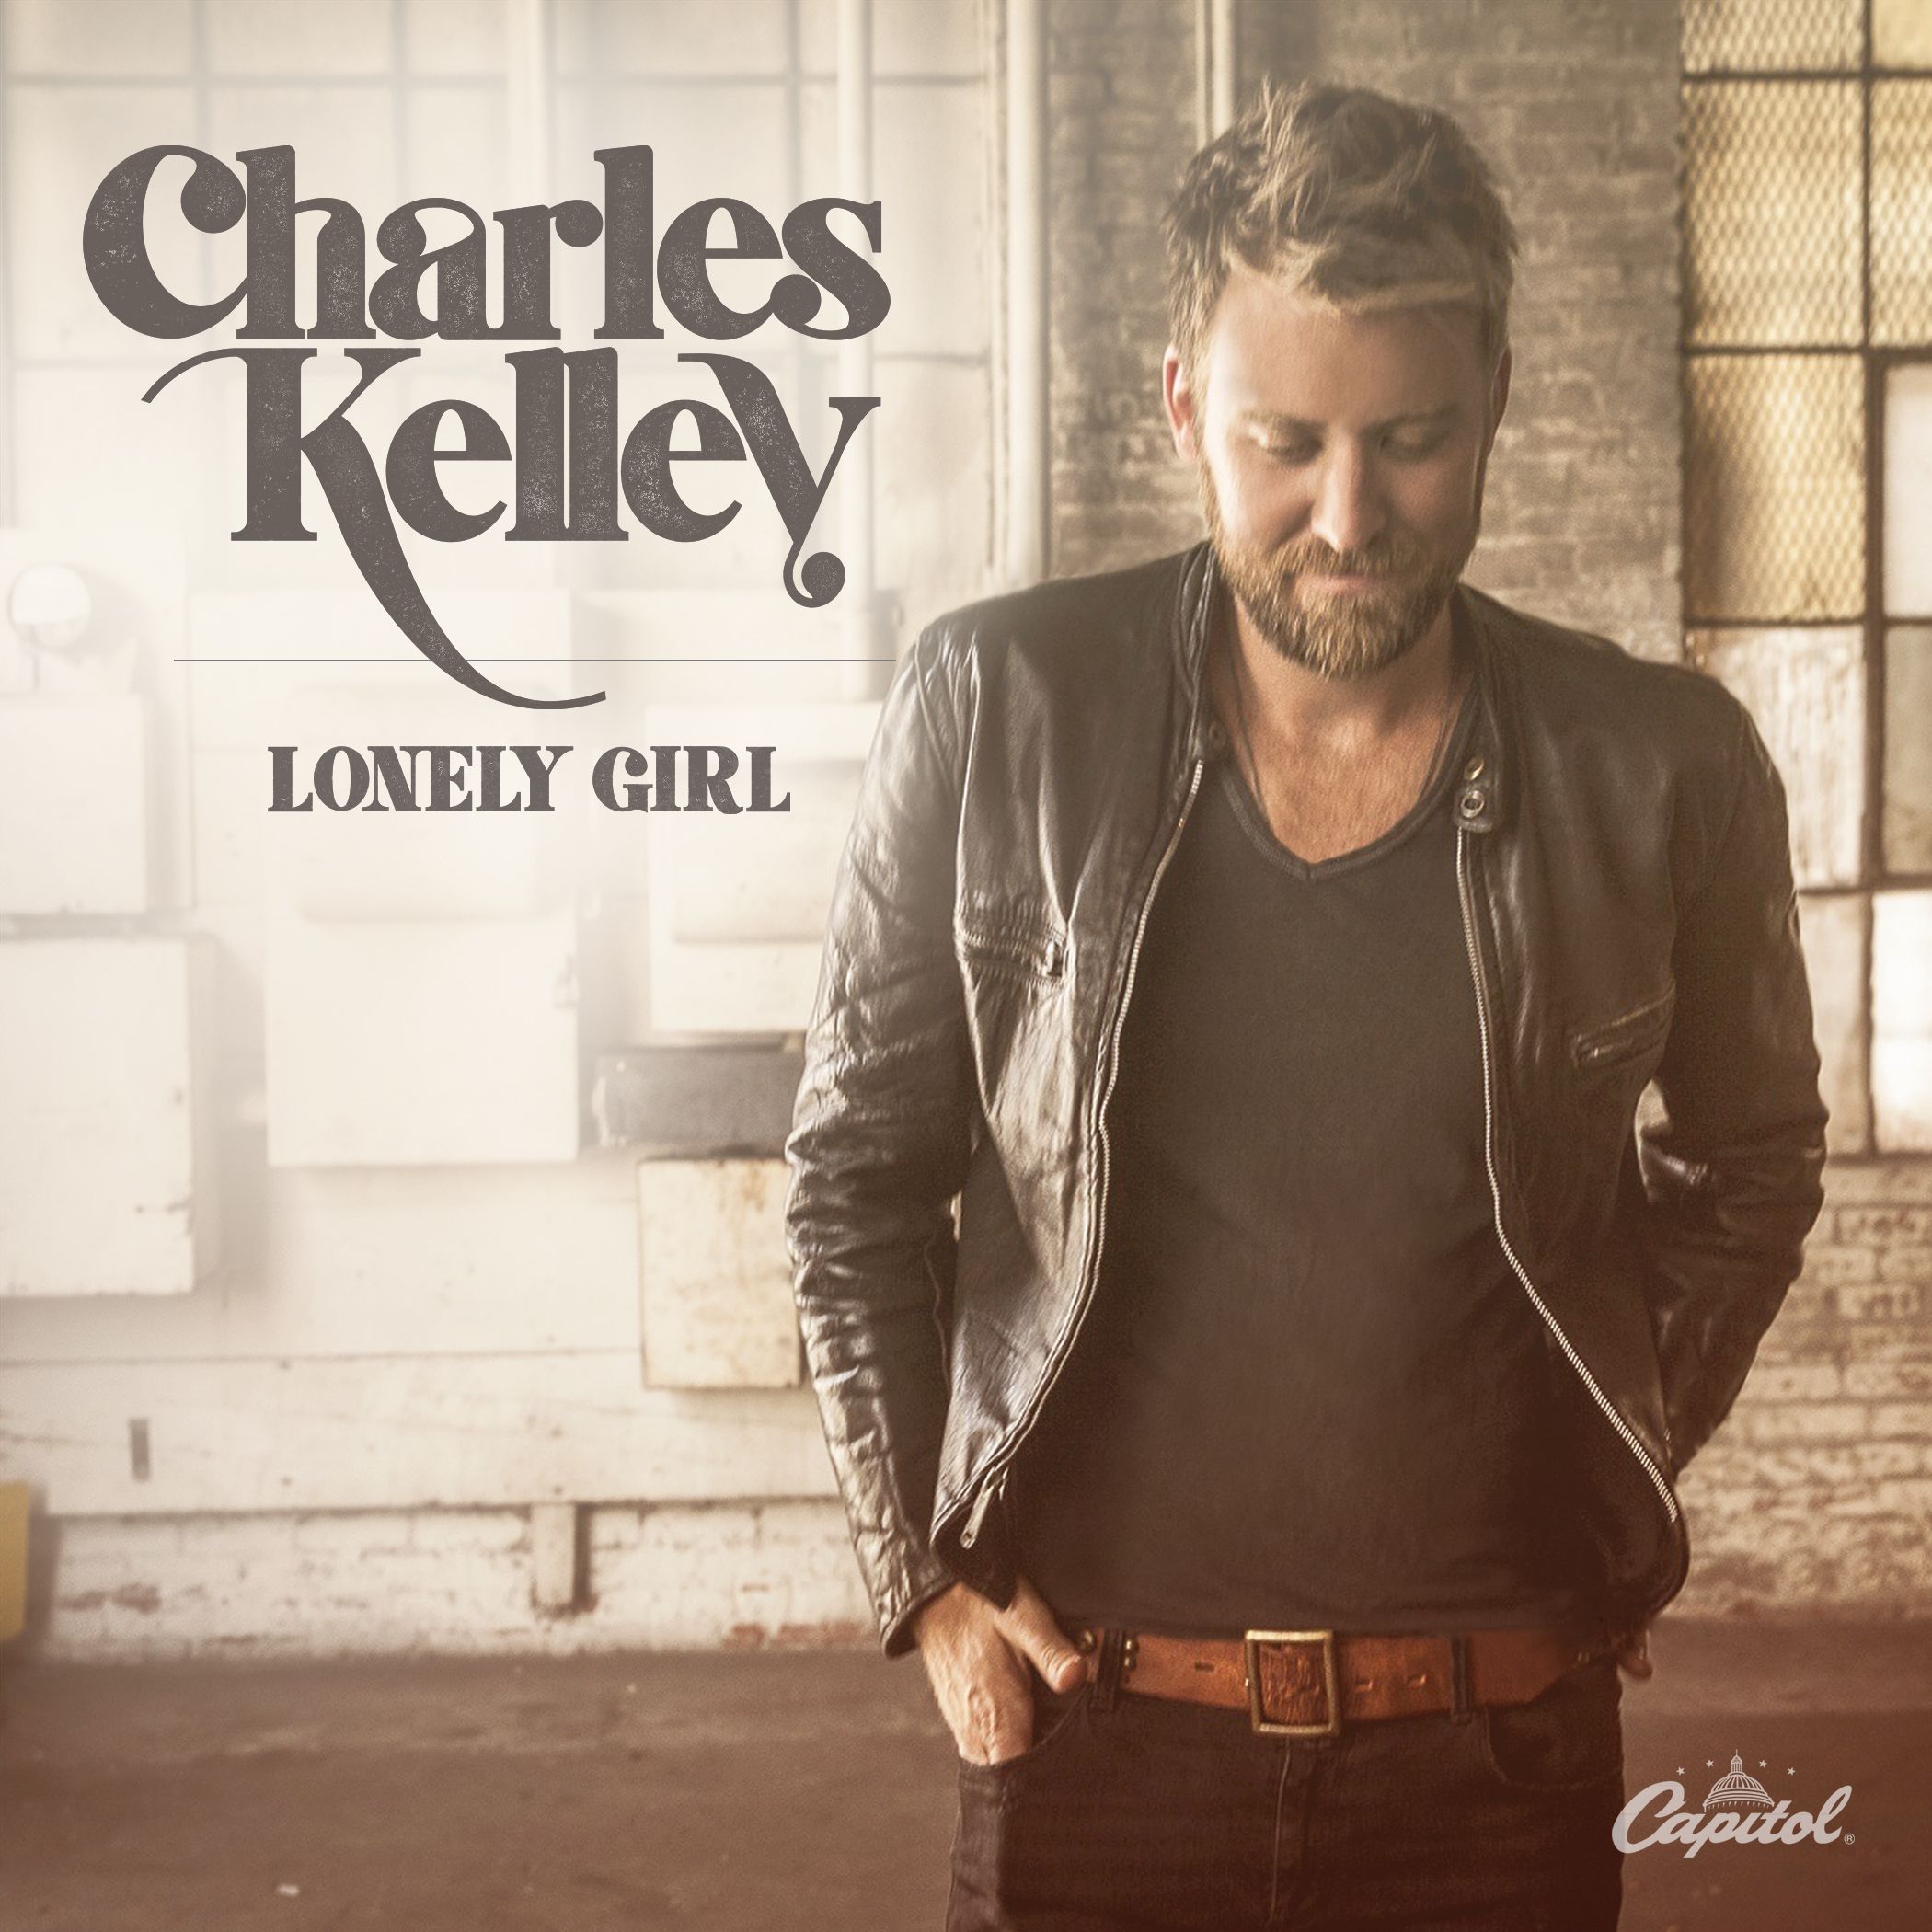 CHARLES KELLEY DELIVERS “LONELY GIRL” WITH “SWAGGER” (NEW YORK TIMES) TO COUNTRY RADIO TODAY